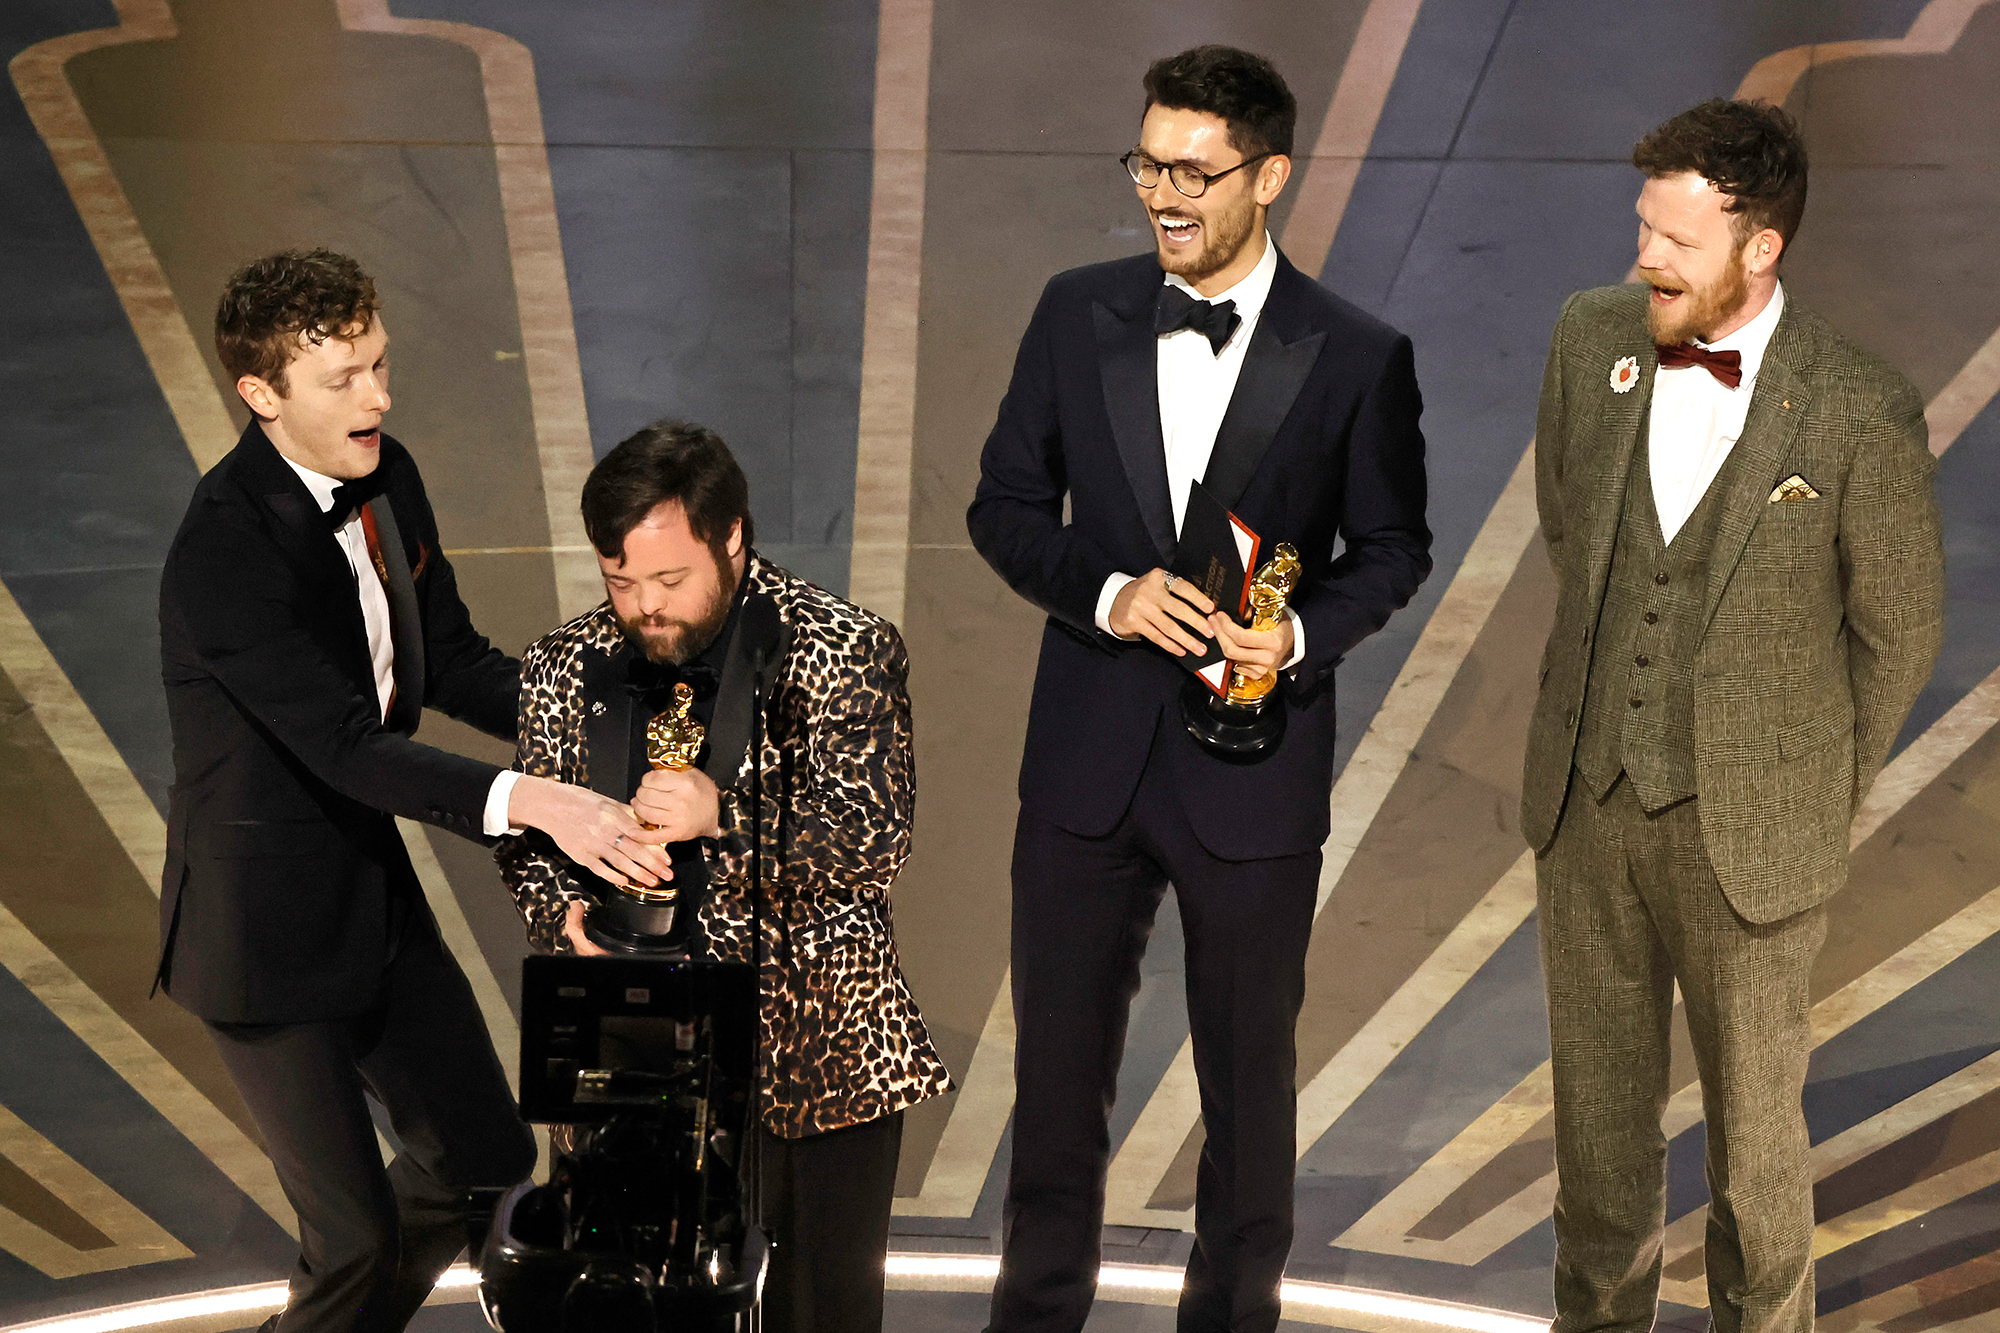 James Martin, second from left, holds the award for best live action short film while the audience sings him "Happy Birthday". 